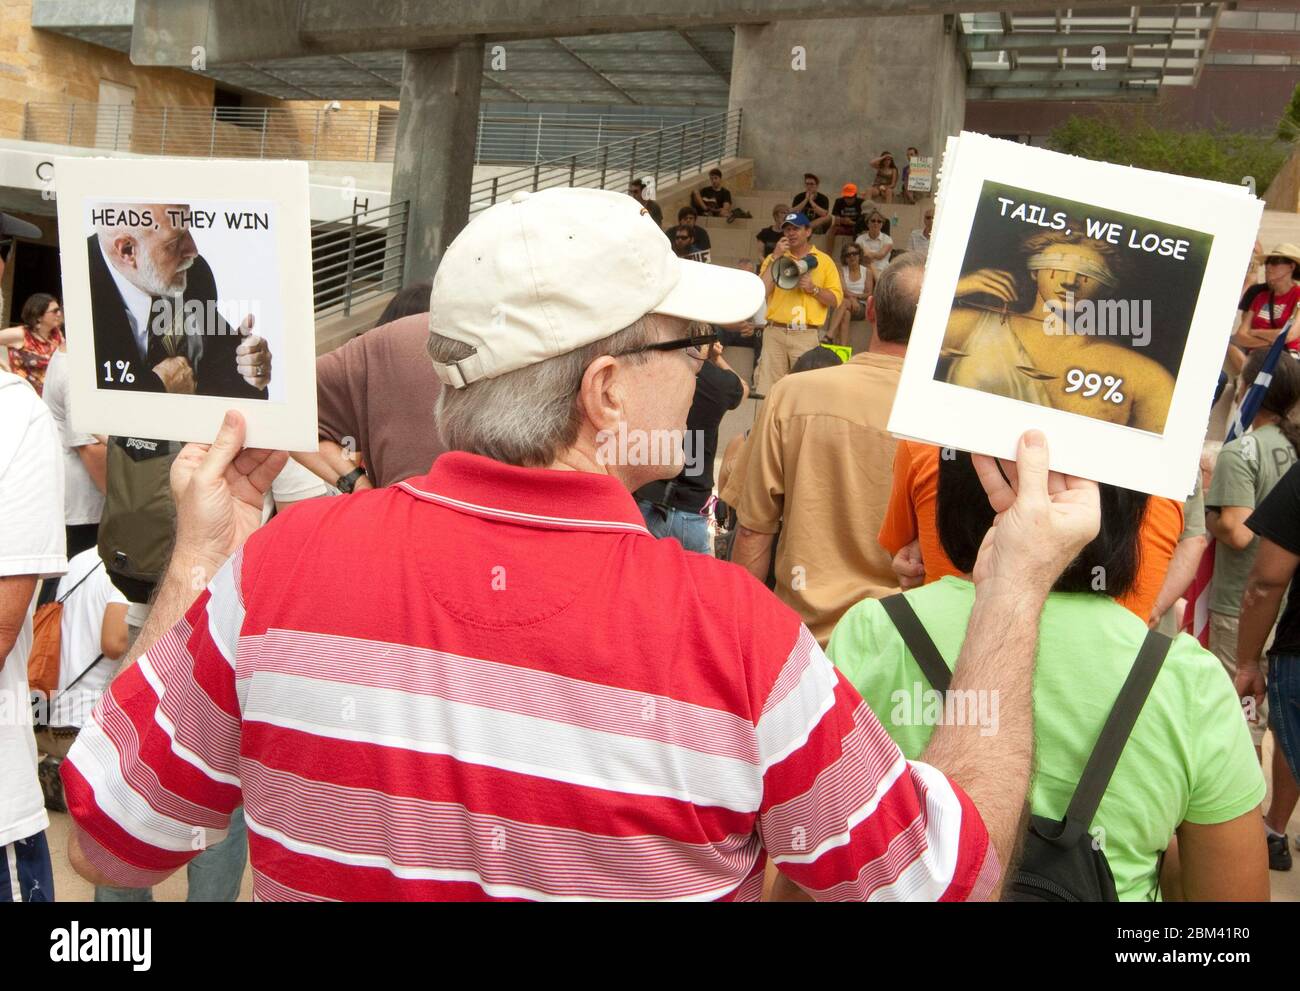 Austin, Texas USA, October 6, 2011: A man holding depictions of the wealthy 1% of Americans and the unfortunate 99% with less money and power joins a small crowd at an Occupy Austin demonstration at City Hall. Occupy Austin is an offshoot of Occupy Wall Street, an ongoing protest that denounces the role that large companies play in the current financial crisis. ©Marjorie Kamys Cotera/Daemmrich Photography Stock Photo